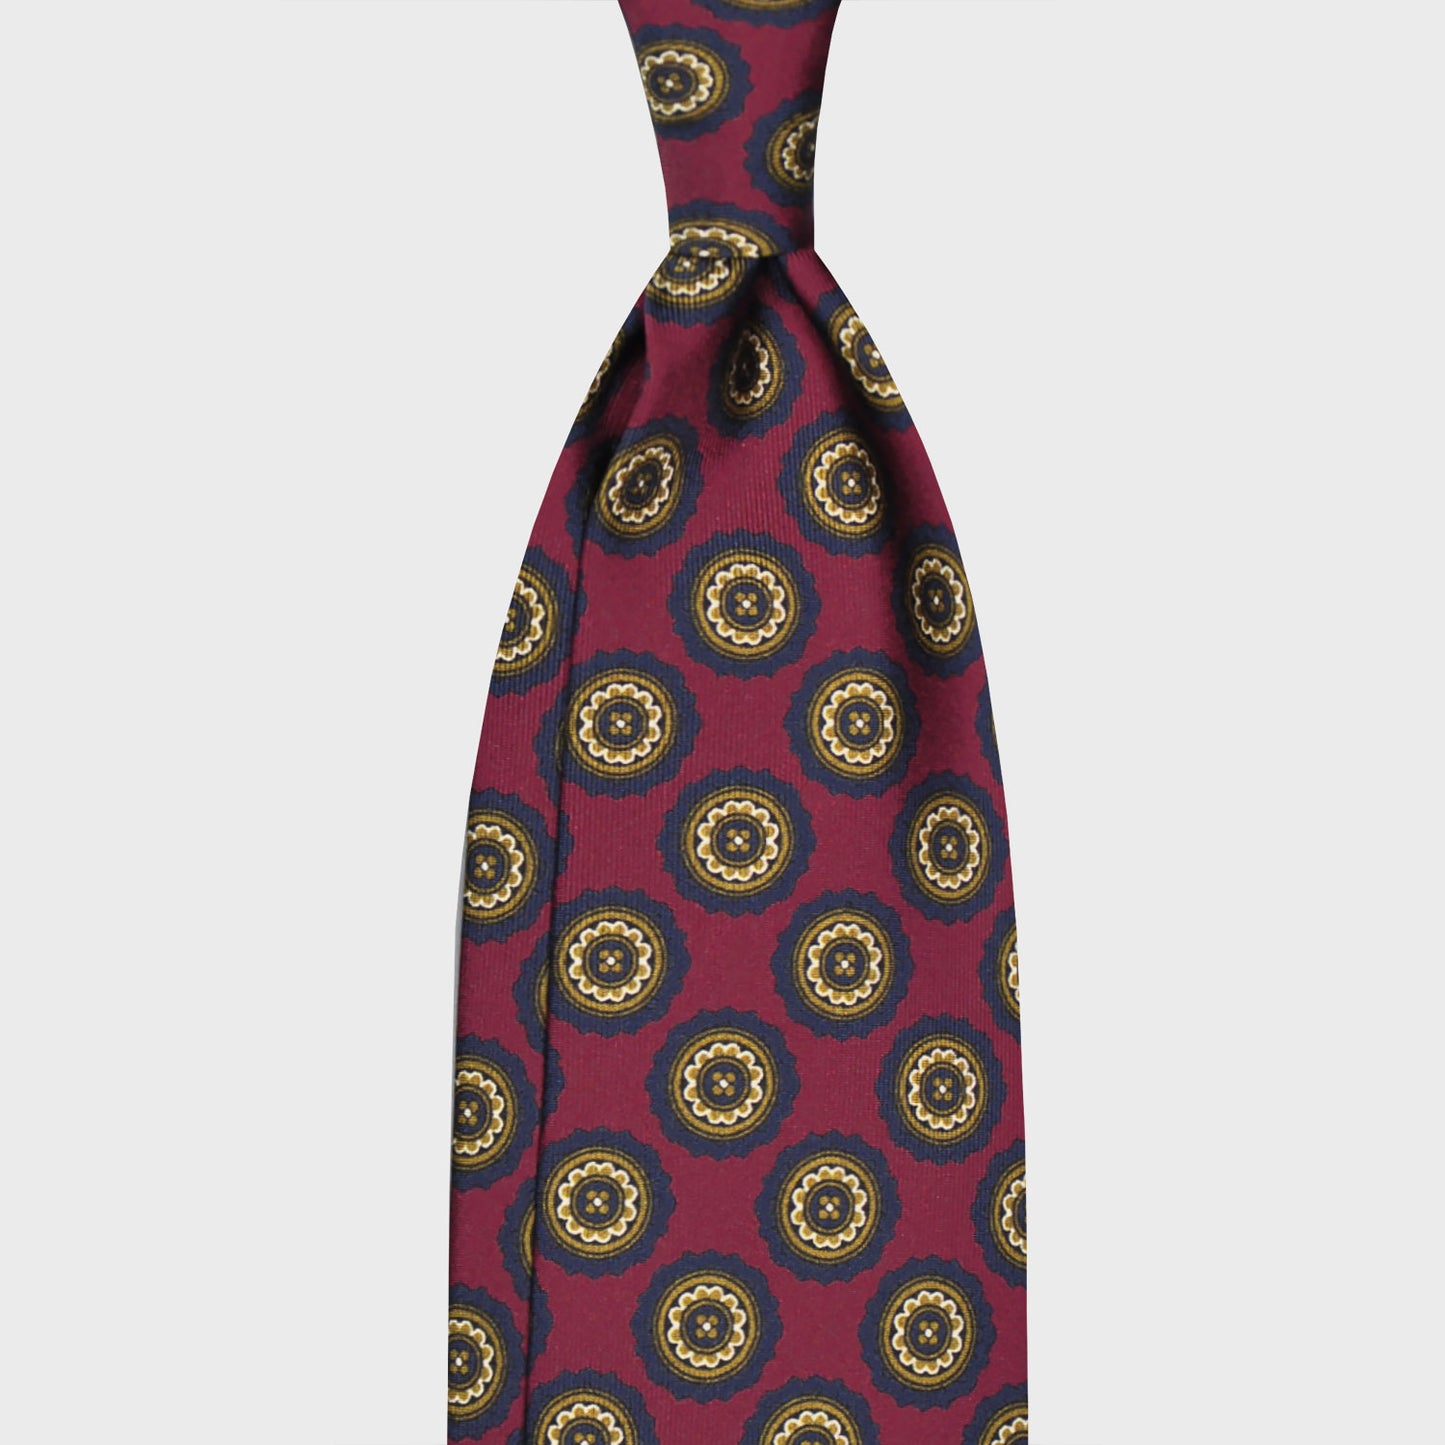 Burgundy Red Medallions Silk Tie. Men's burgundy silk tie made with finest Italian silk soft to the touch, unlined tie 3 folds, refined medallions printed pattern navy blue and olive green, classic handmade tie F.Marino Napoli exclusive for Wools Boutique Uomo